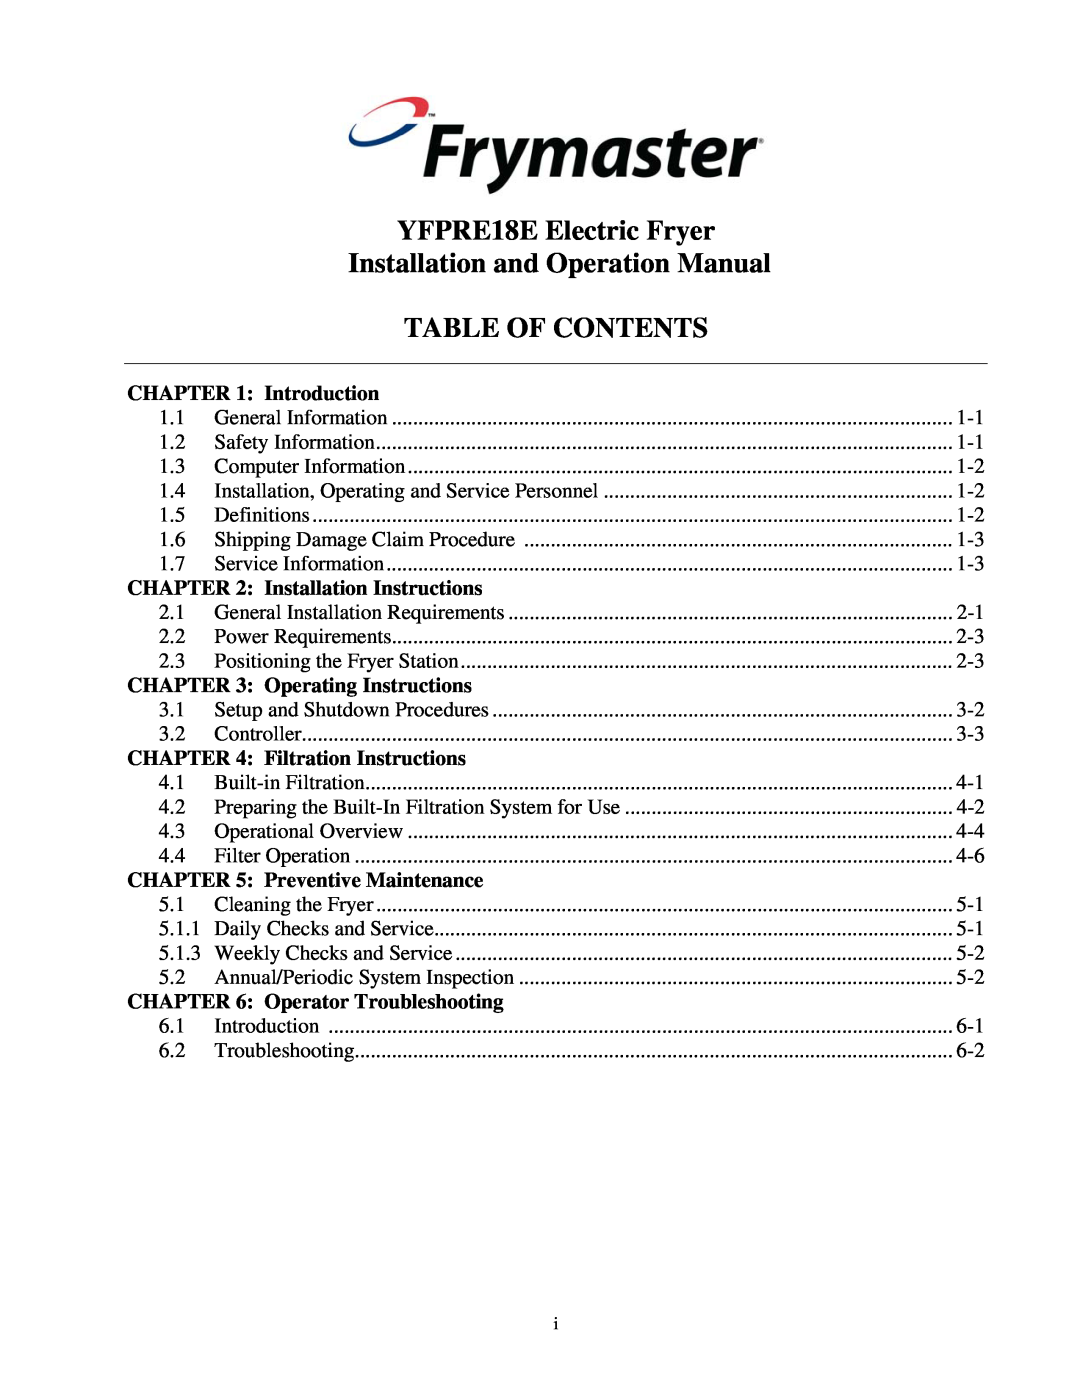 Frymaster YFPRE1817E operation manual Table Of Contents, Introduction, Installation Instructions, Operating Instructions 